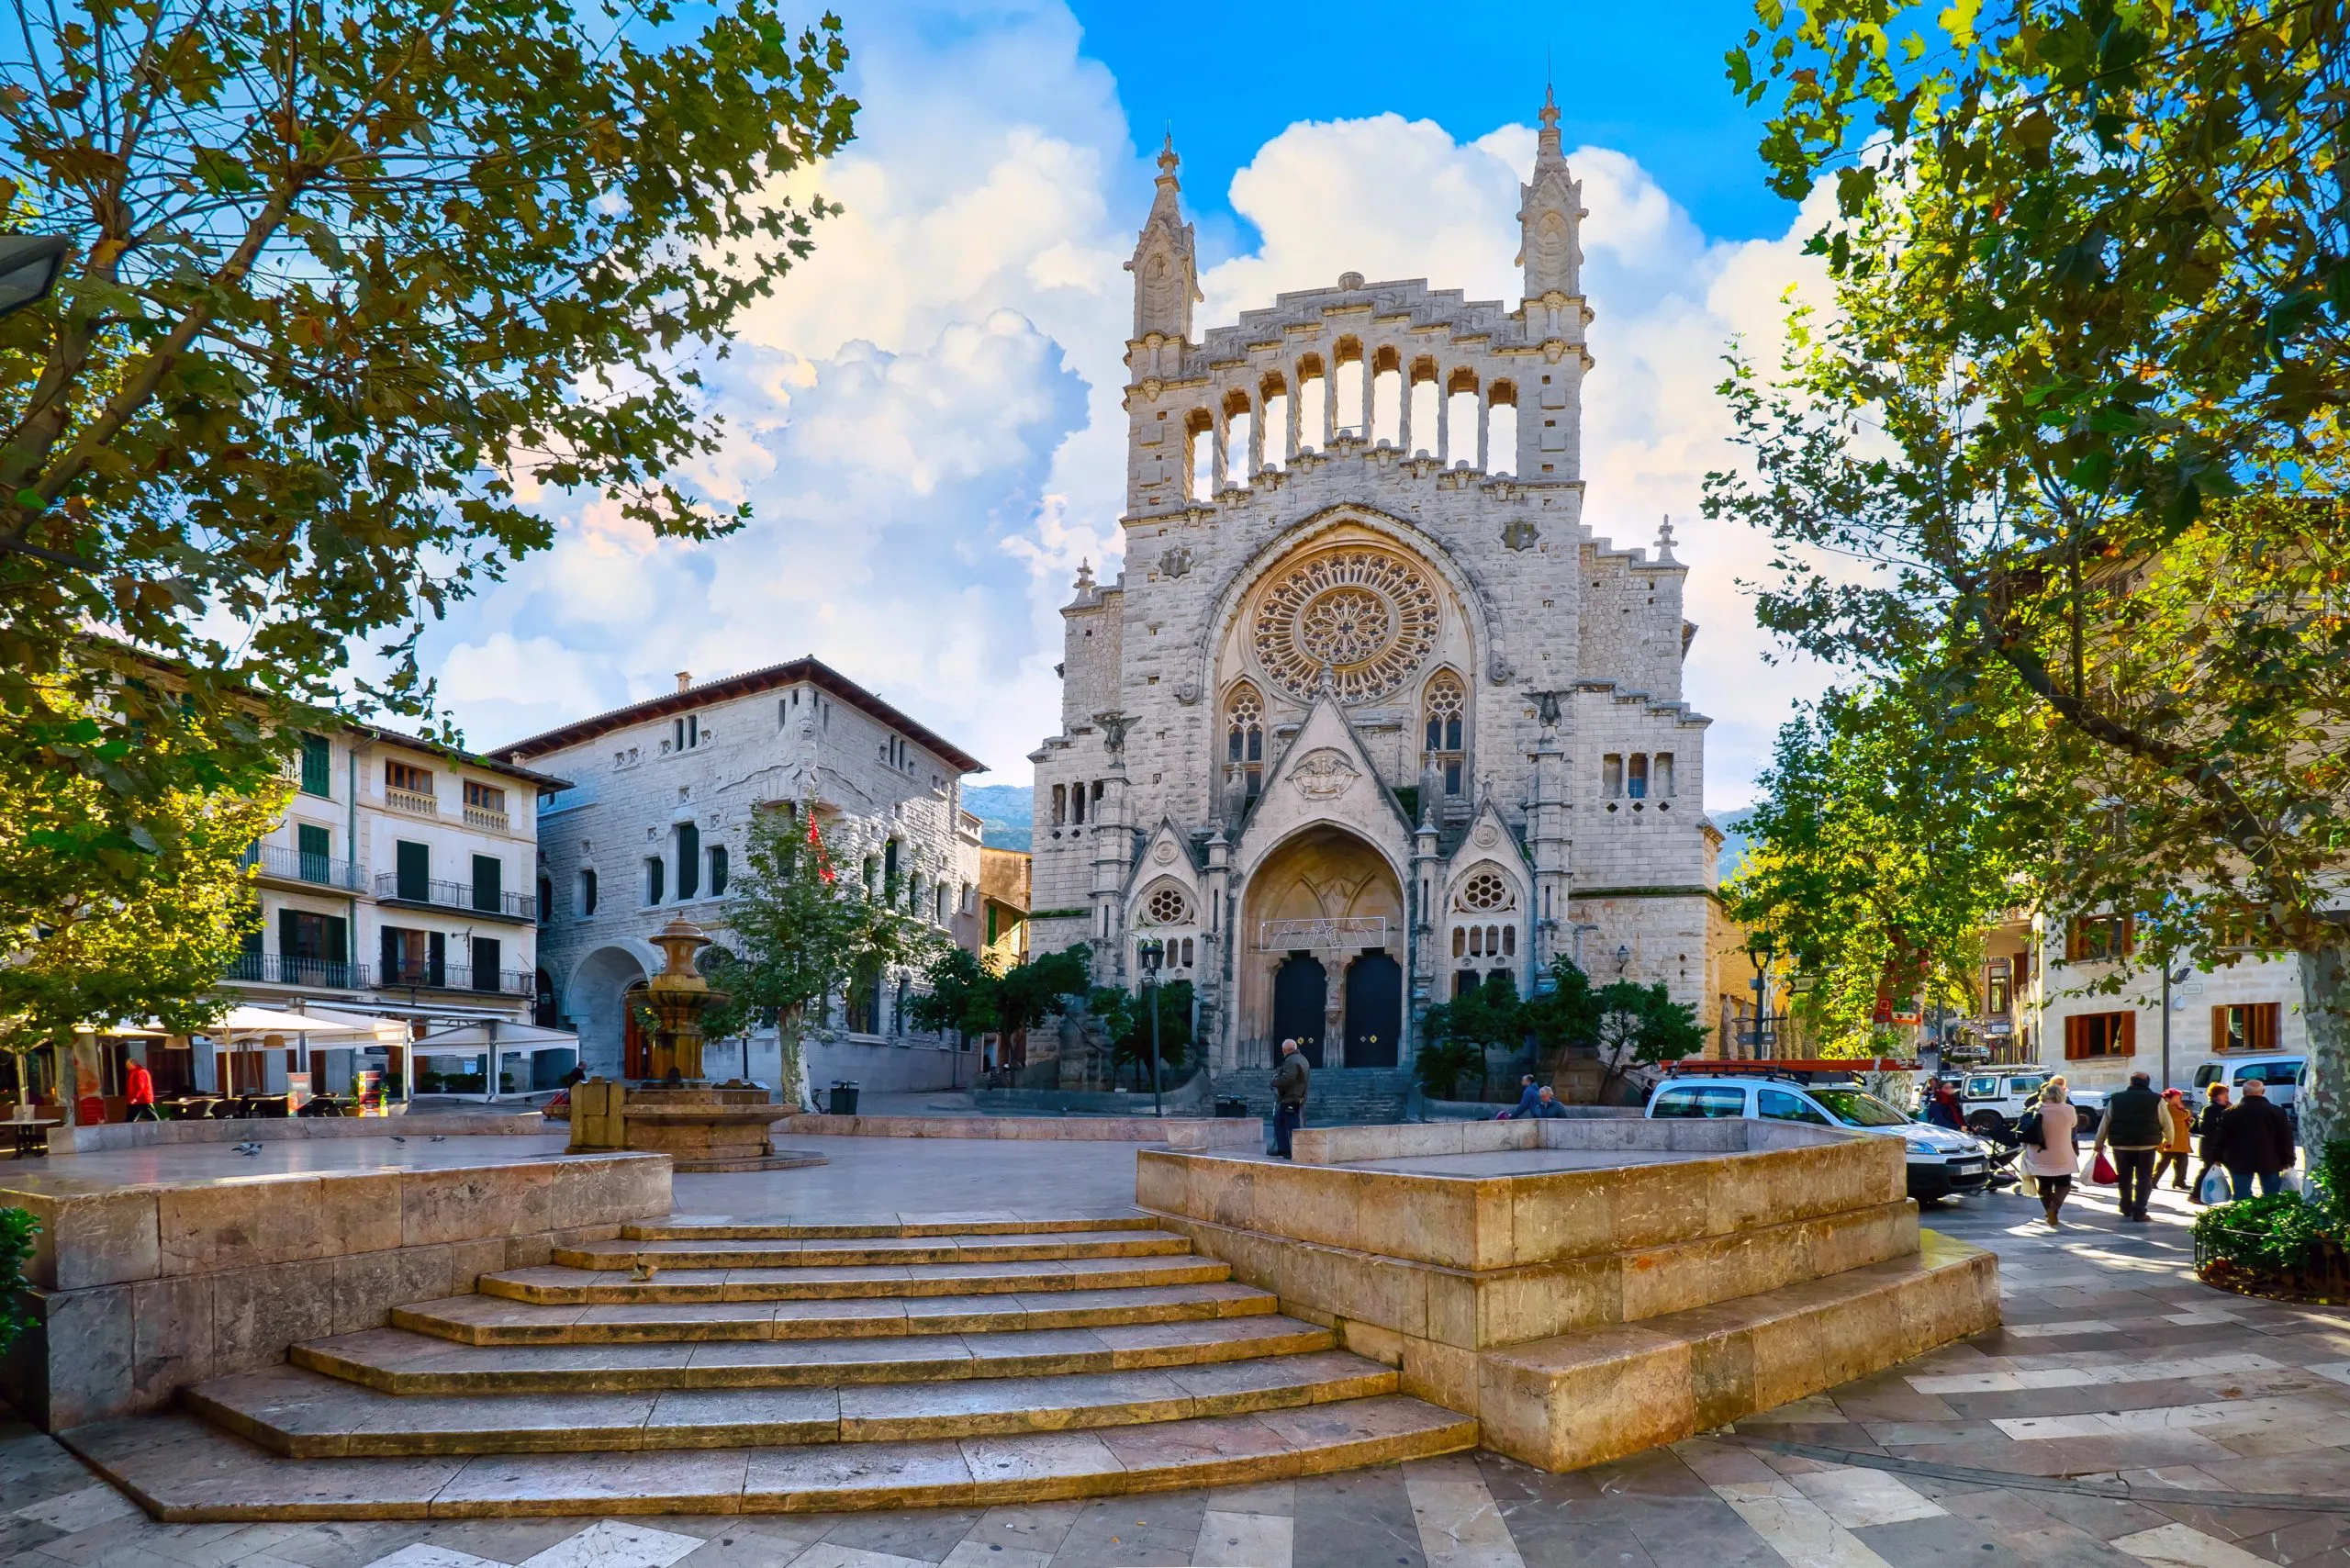 Roman cathedral in the city of Soller